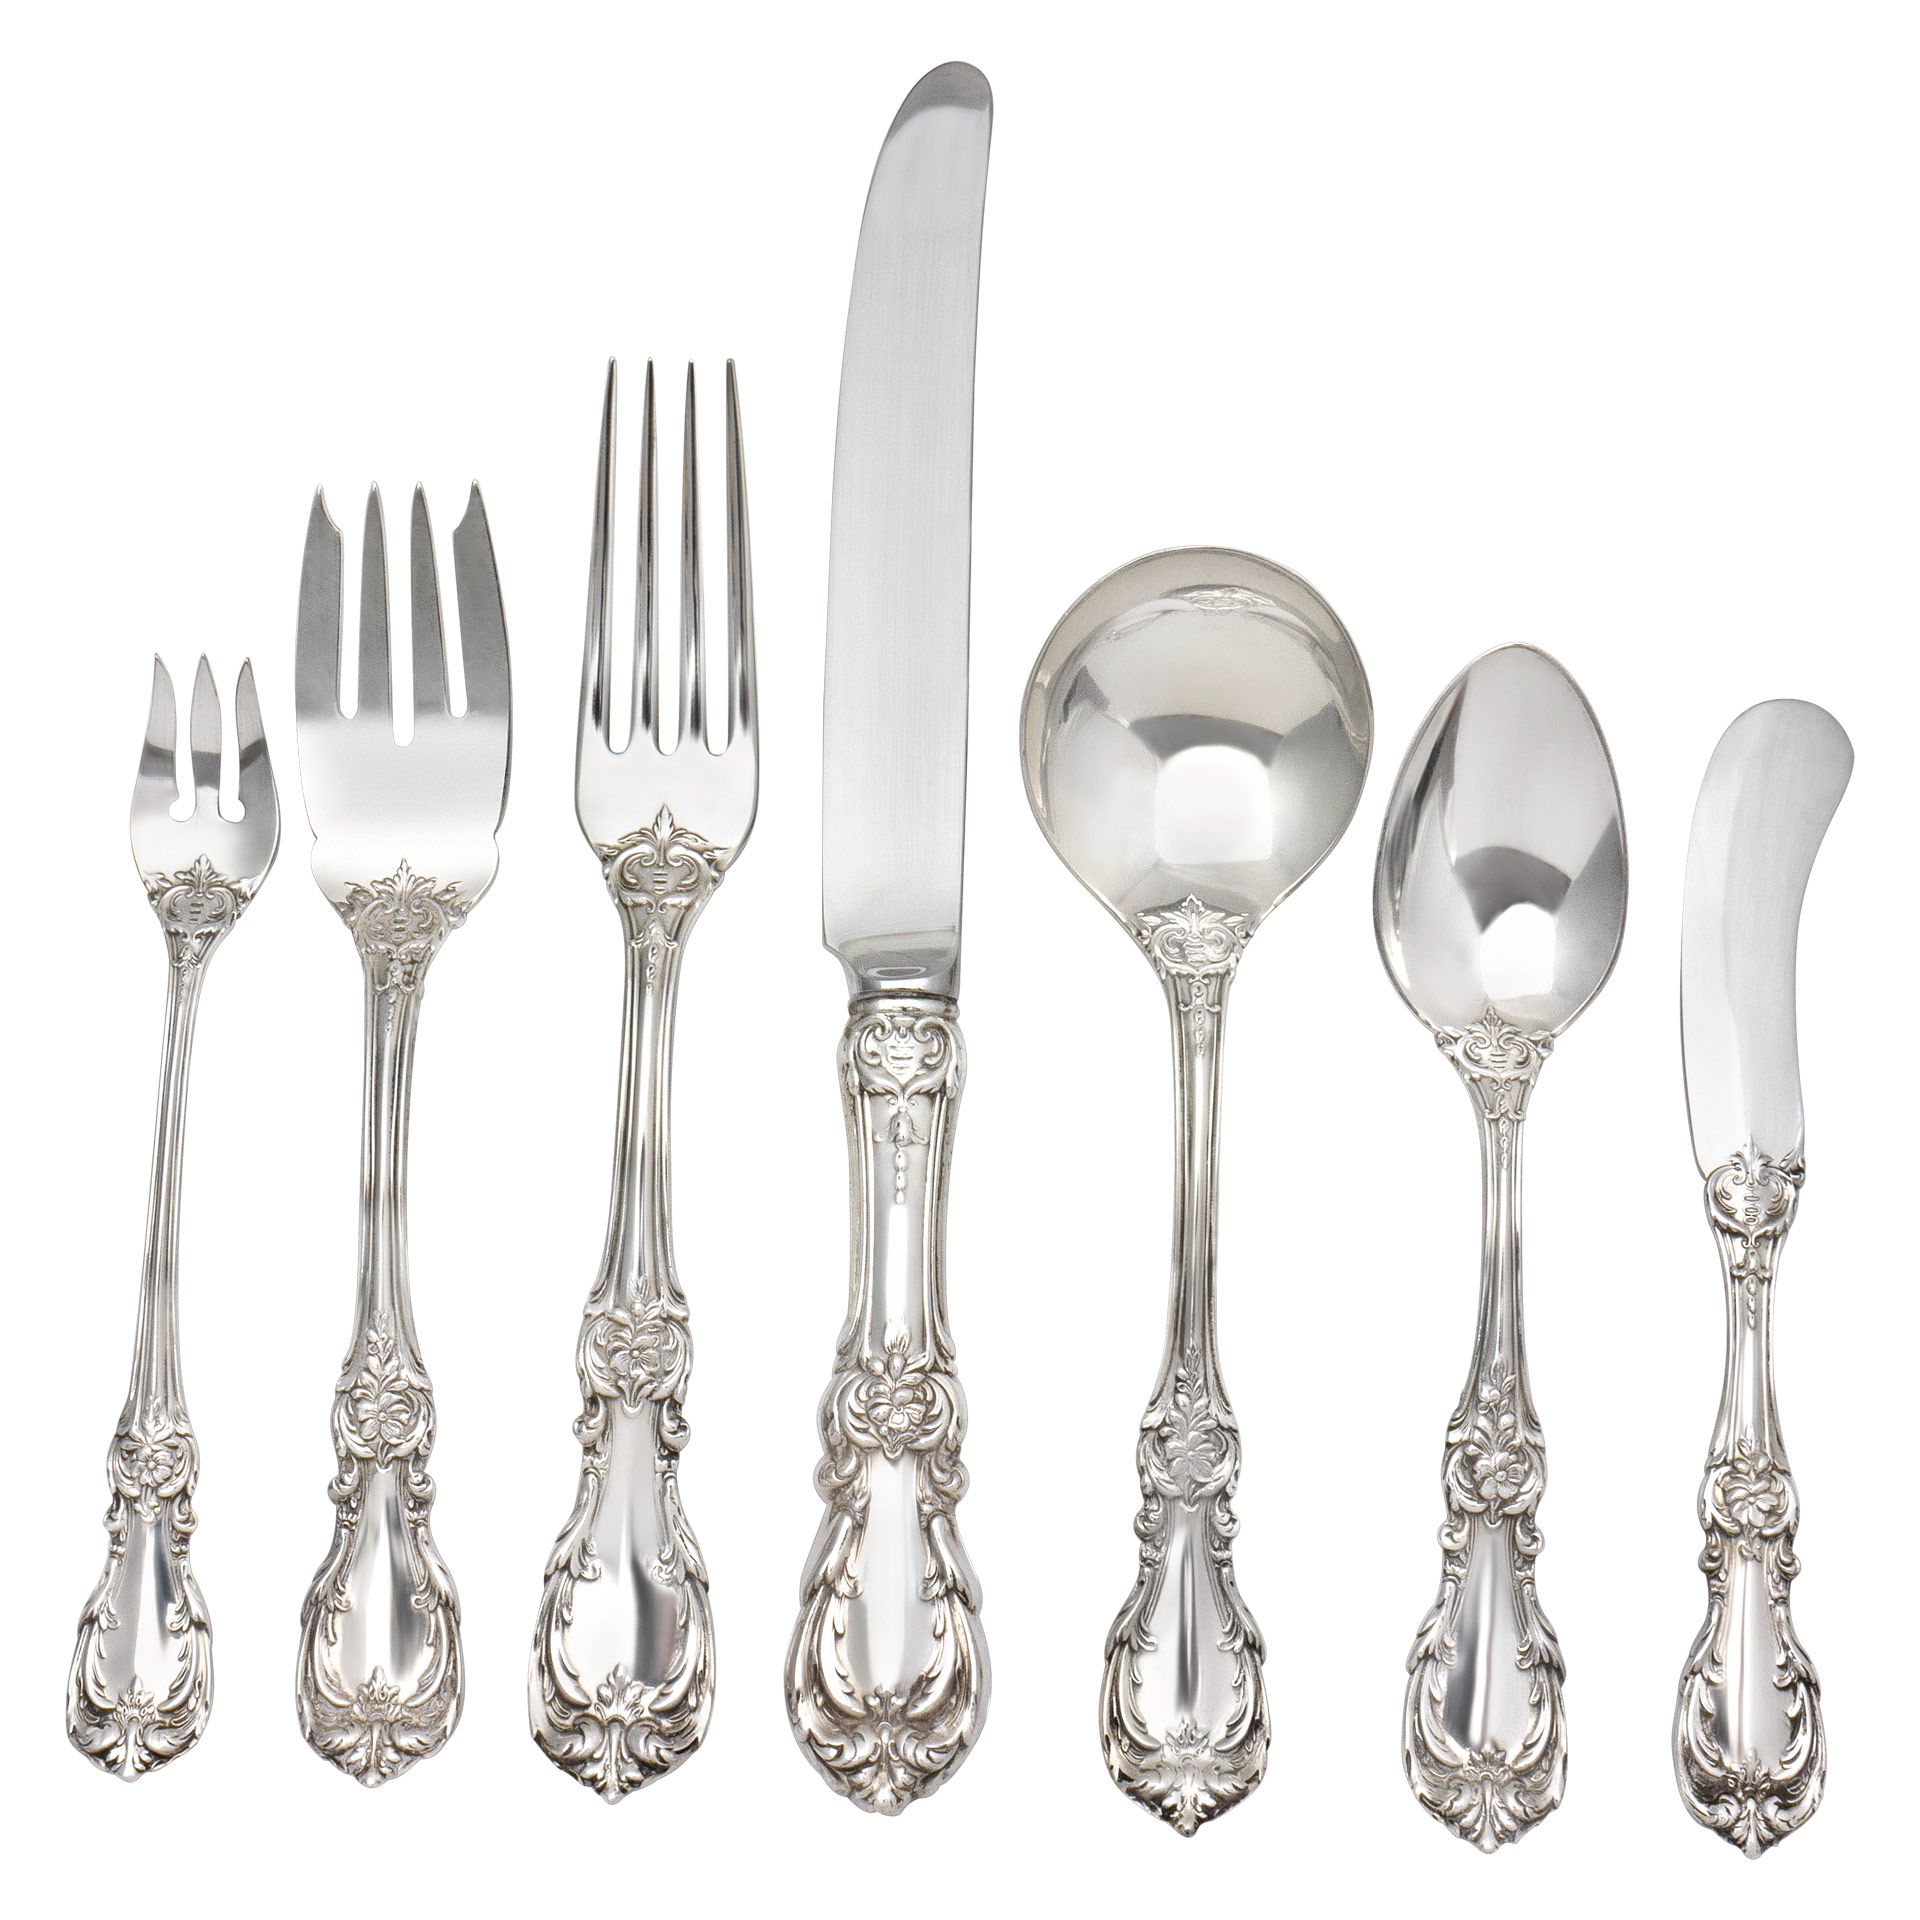 BURGUNDY" sterling silver flatware set,  Ptd in 1949 by REED & BARTON- 7 Place Settings for 12 + 7 serving pieces. Over 120 ounces troy sterling silver image 1